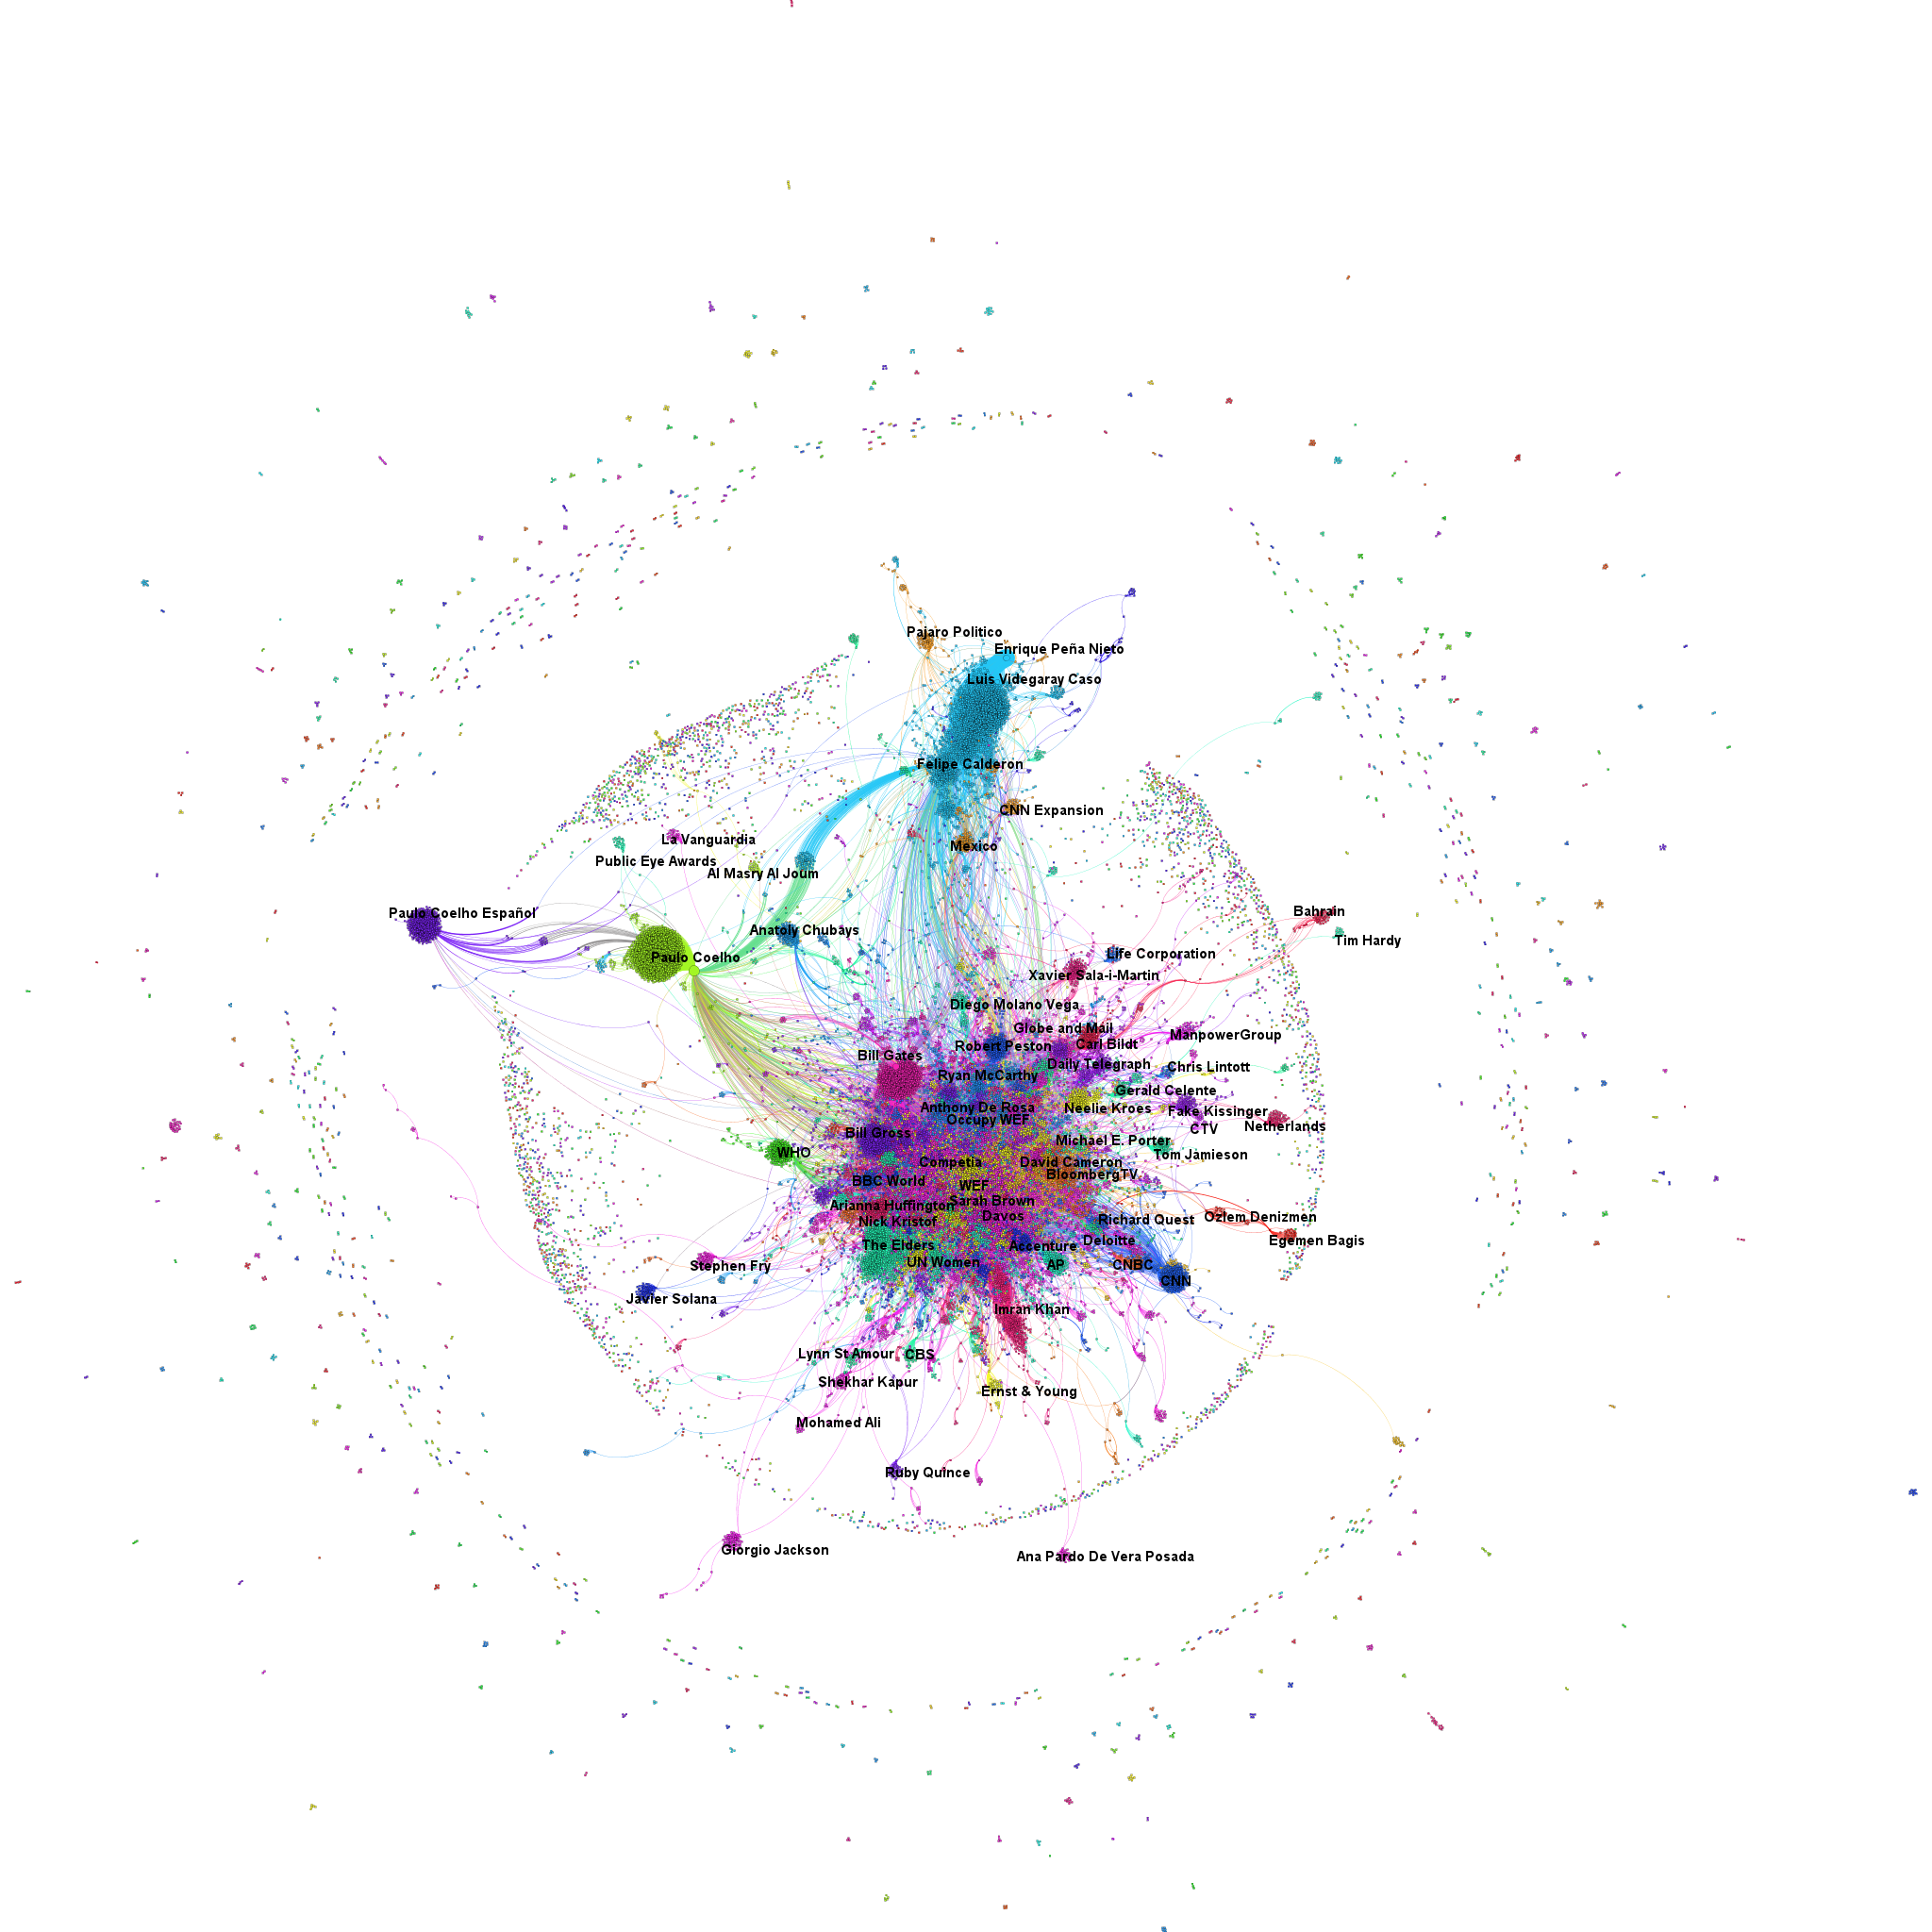 Social Network Analysis of the Twitter conversations at the WEF in Davos